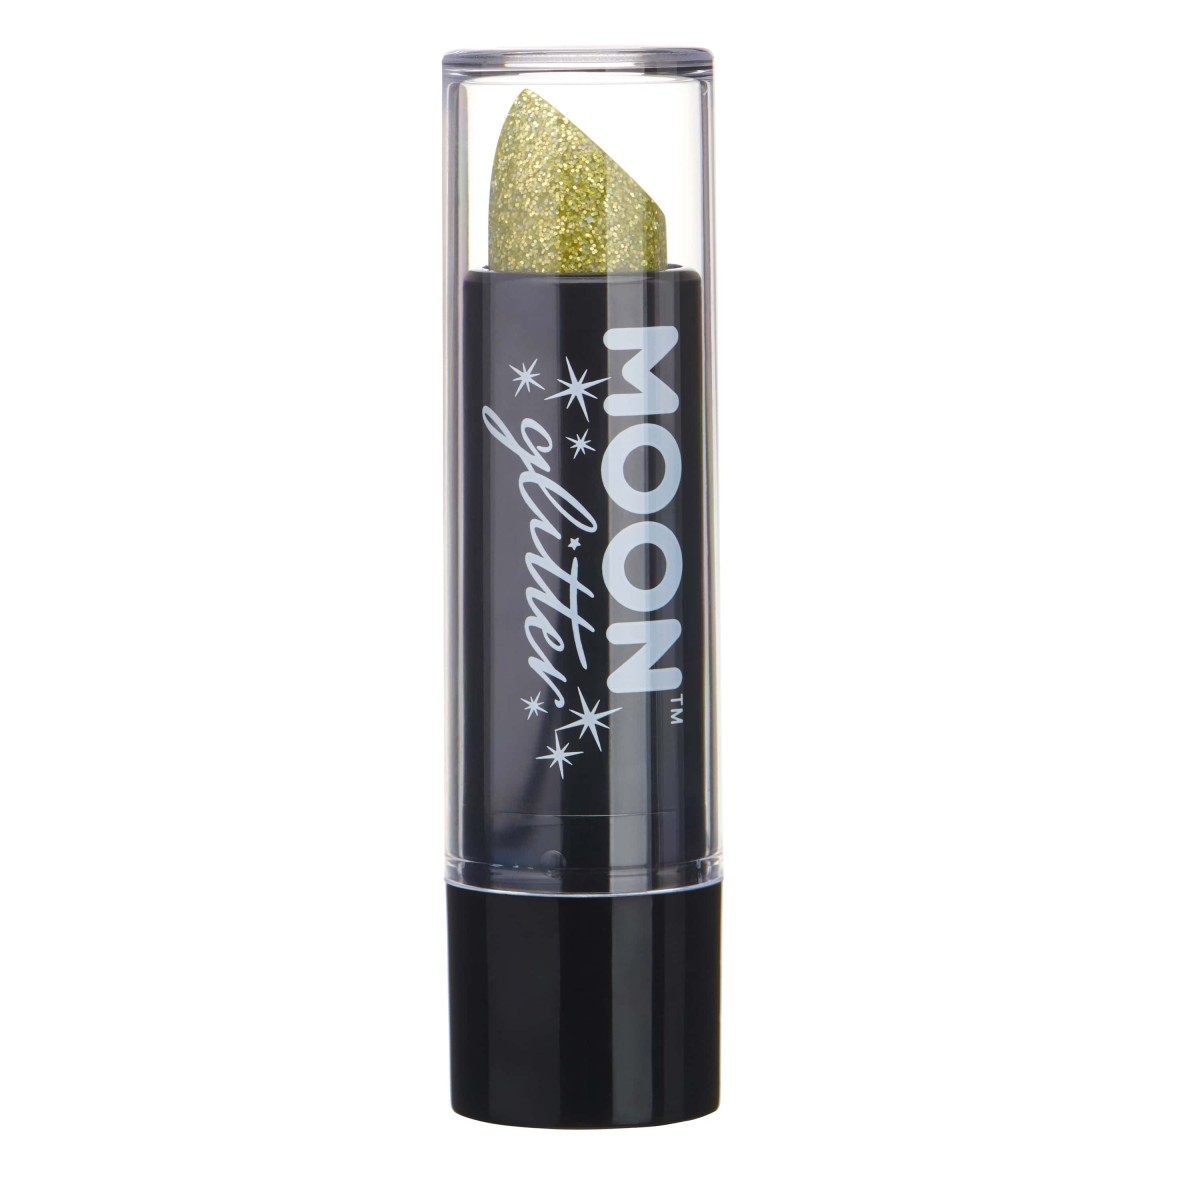 MOON CREATIONS G15 HOLOGRAPHIC GLITTER LIPSTICK GOLD 4.2g